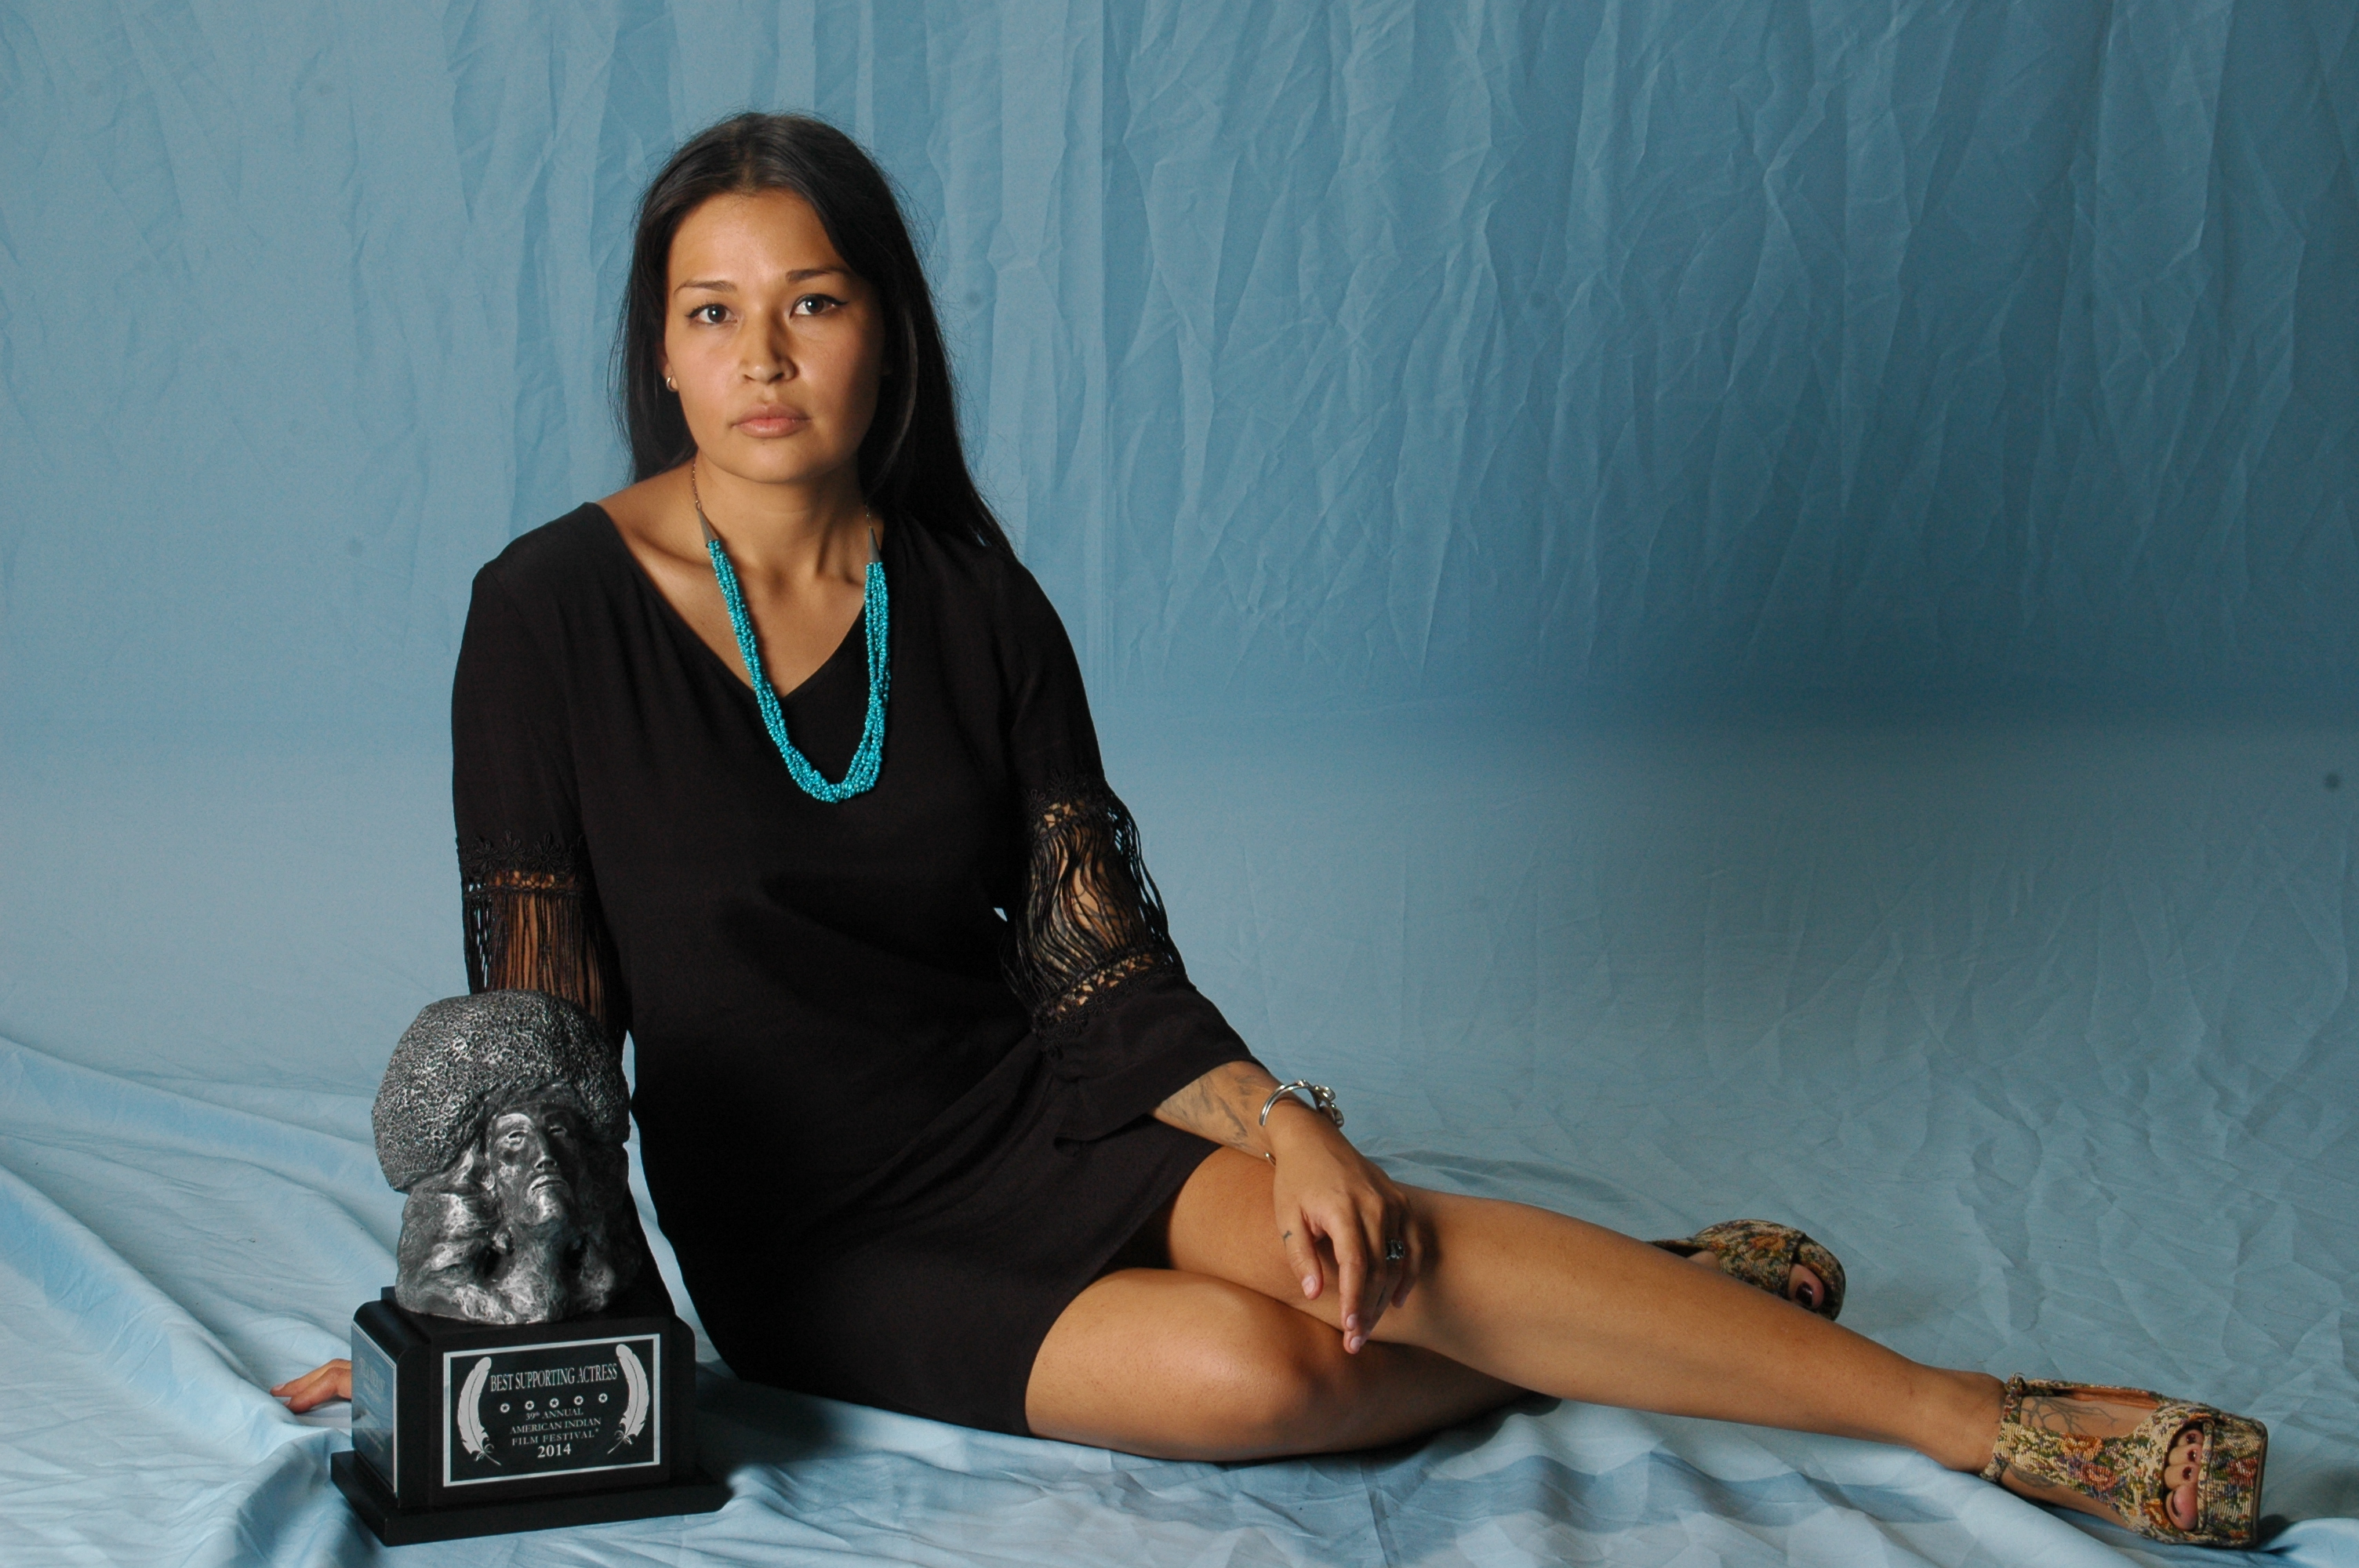 Morningstar Angeline at the American Indian Film Festival after receiving her award for Best Supporting Actress in Drunktown's Finest